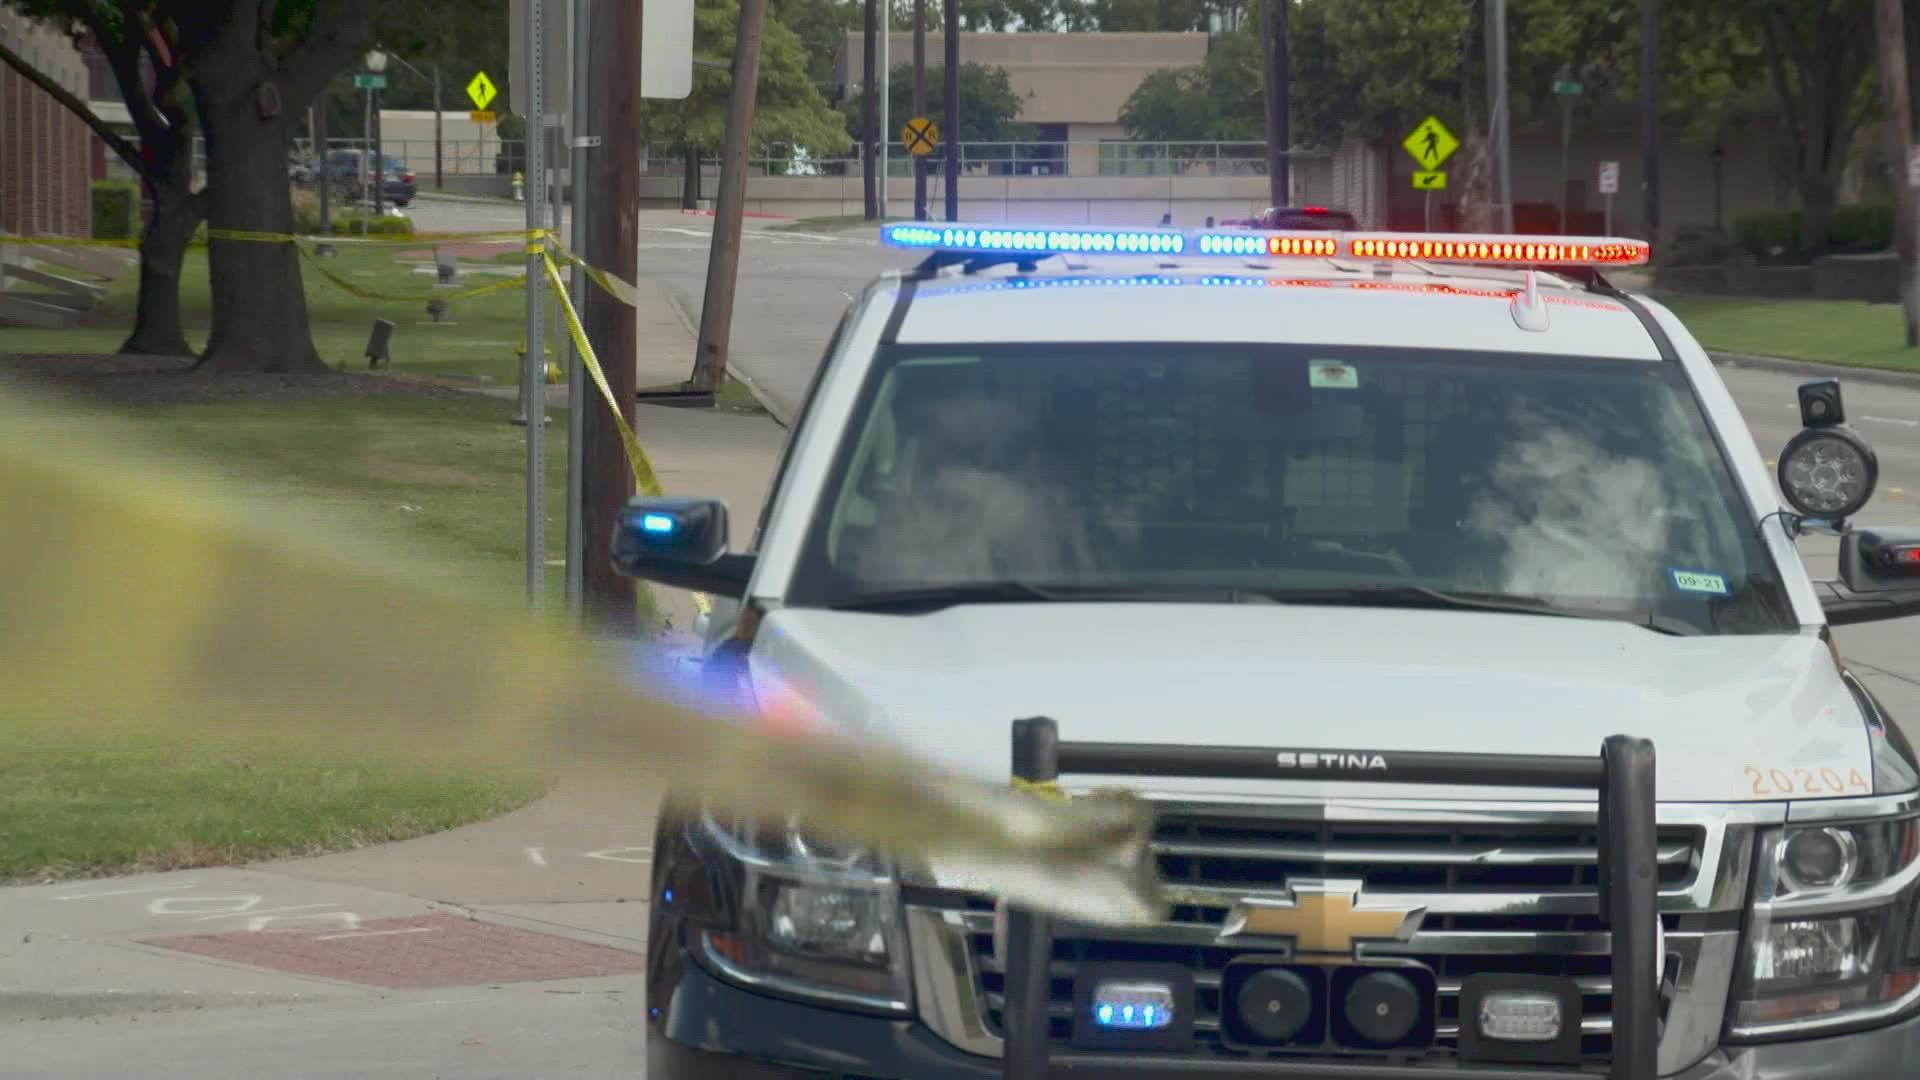 The Sunday killing of a Lyft driver in Garland and a shooting inside the Plano Police department are related, police departments for both cities confirmed Monday.